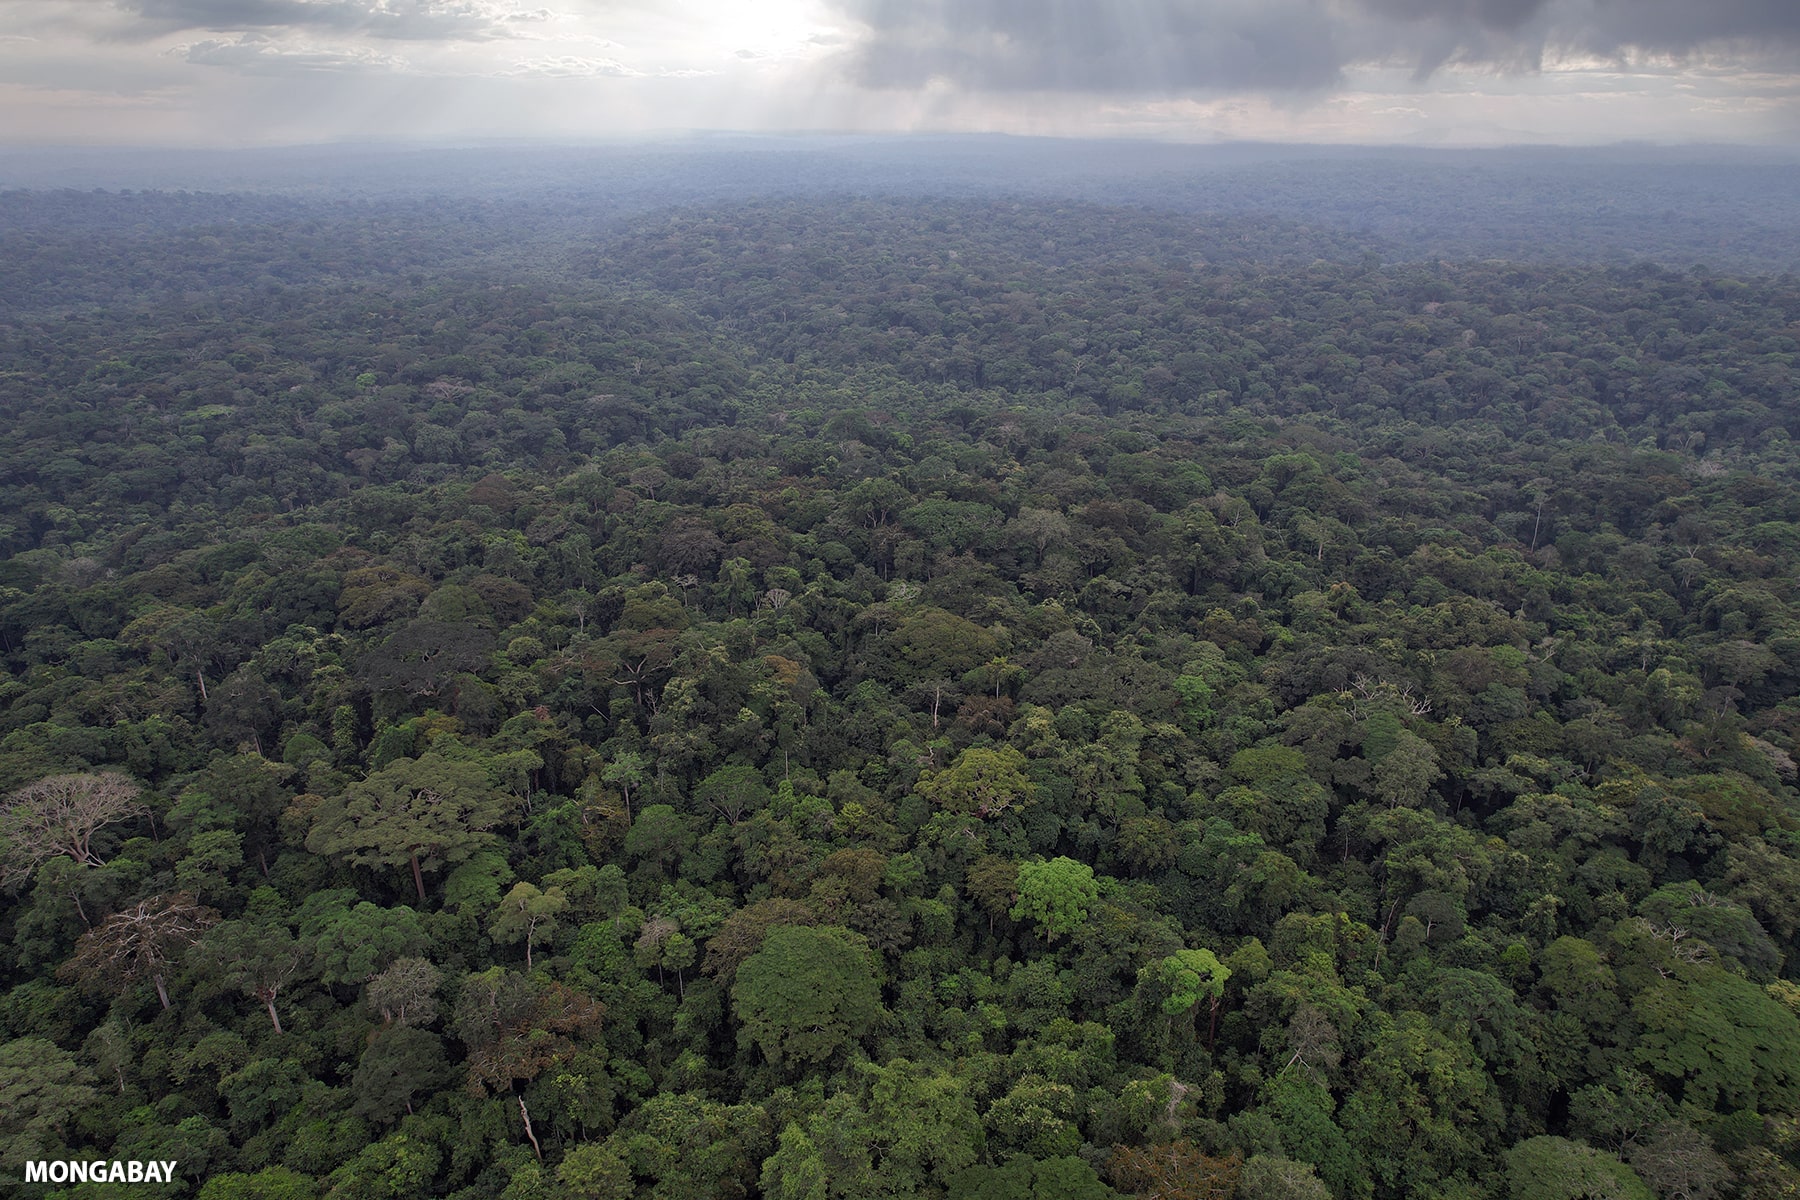 A forest in Gabon taken from the sky